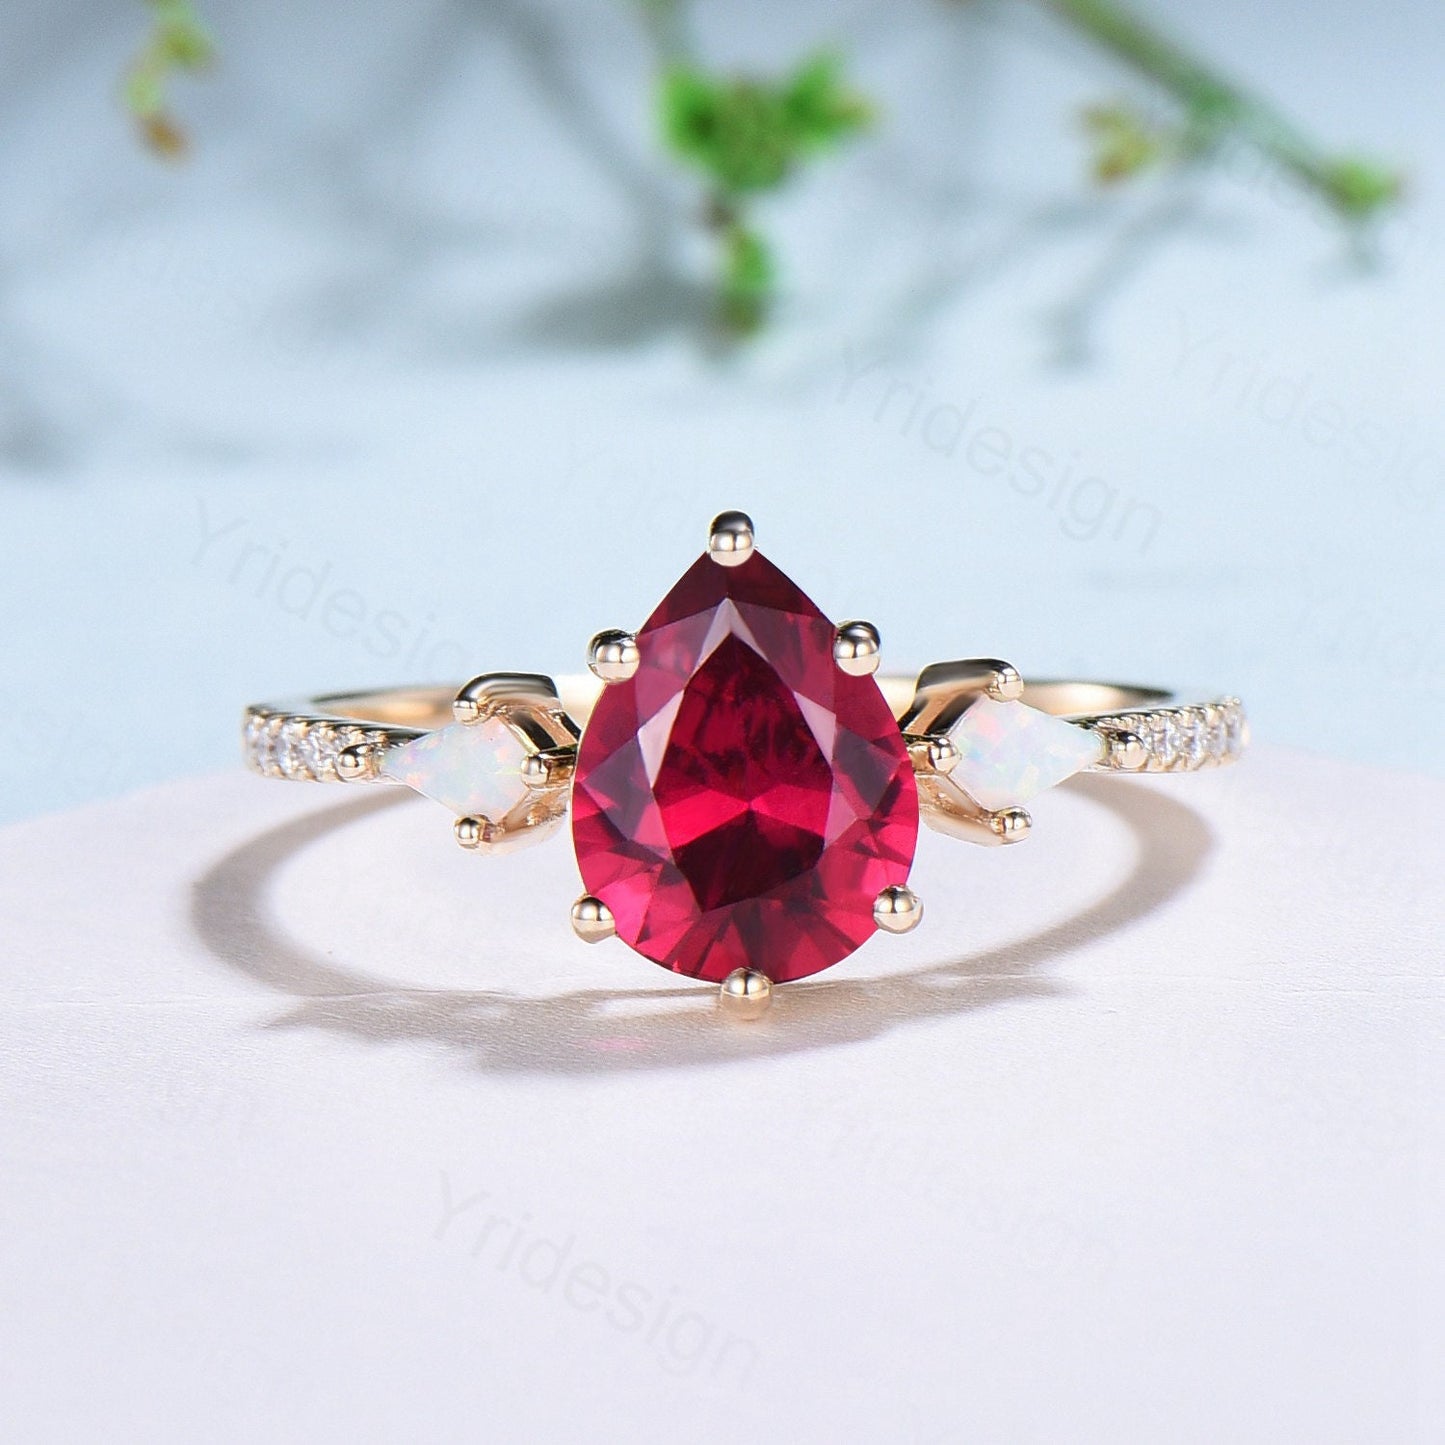 Vintage Ruby Opal Engagement Ring Set Crown Moissanite Ruby Bridal Wedding ring Set Art Deco Anniversary Gift Unique Promise Ring For Women - PENFINE